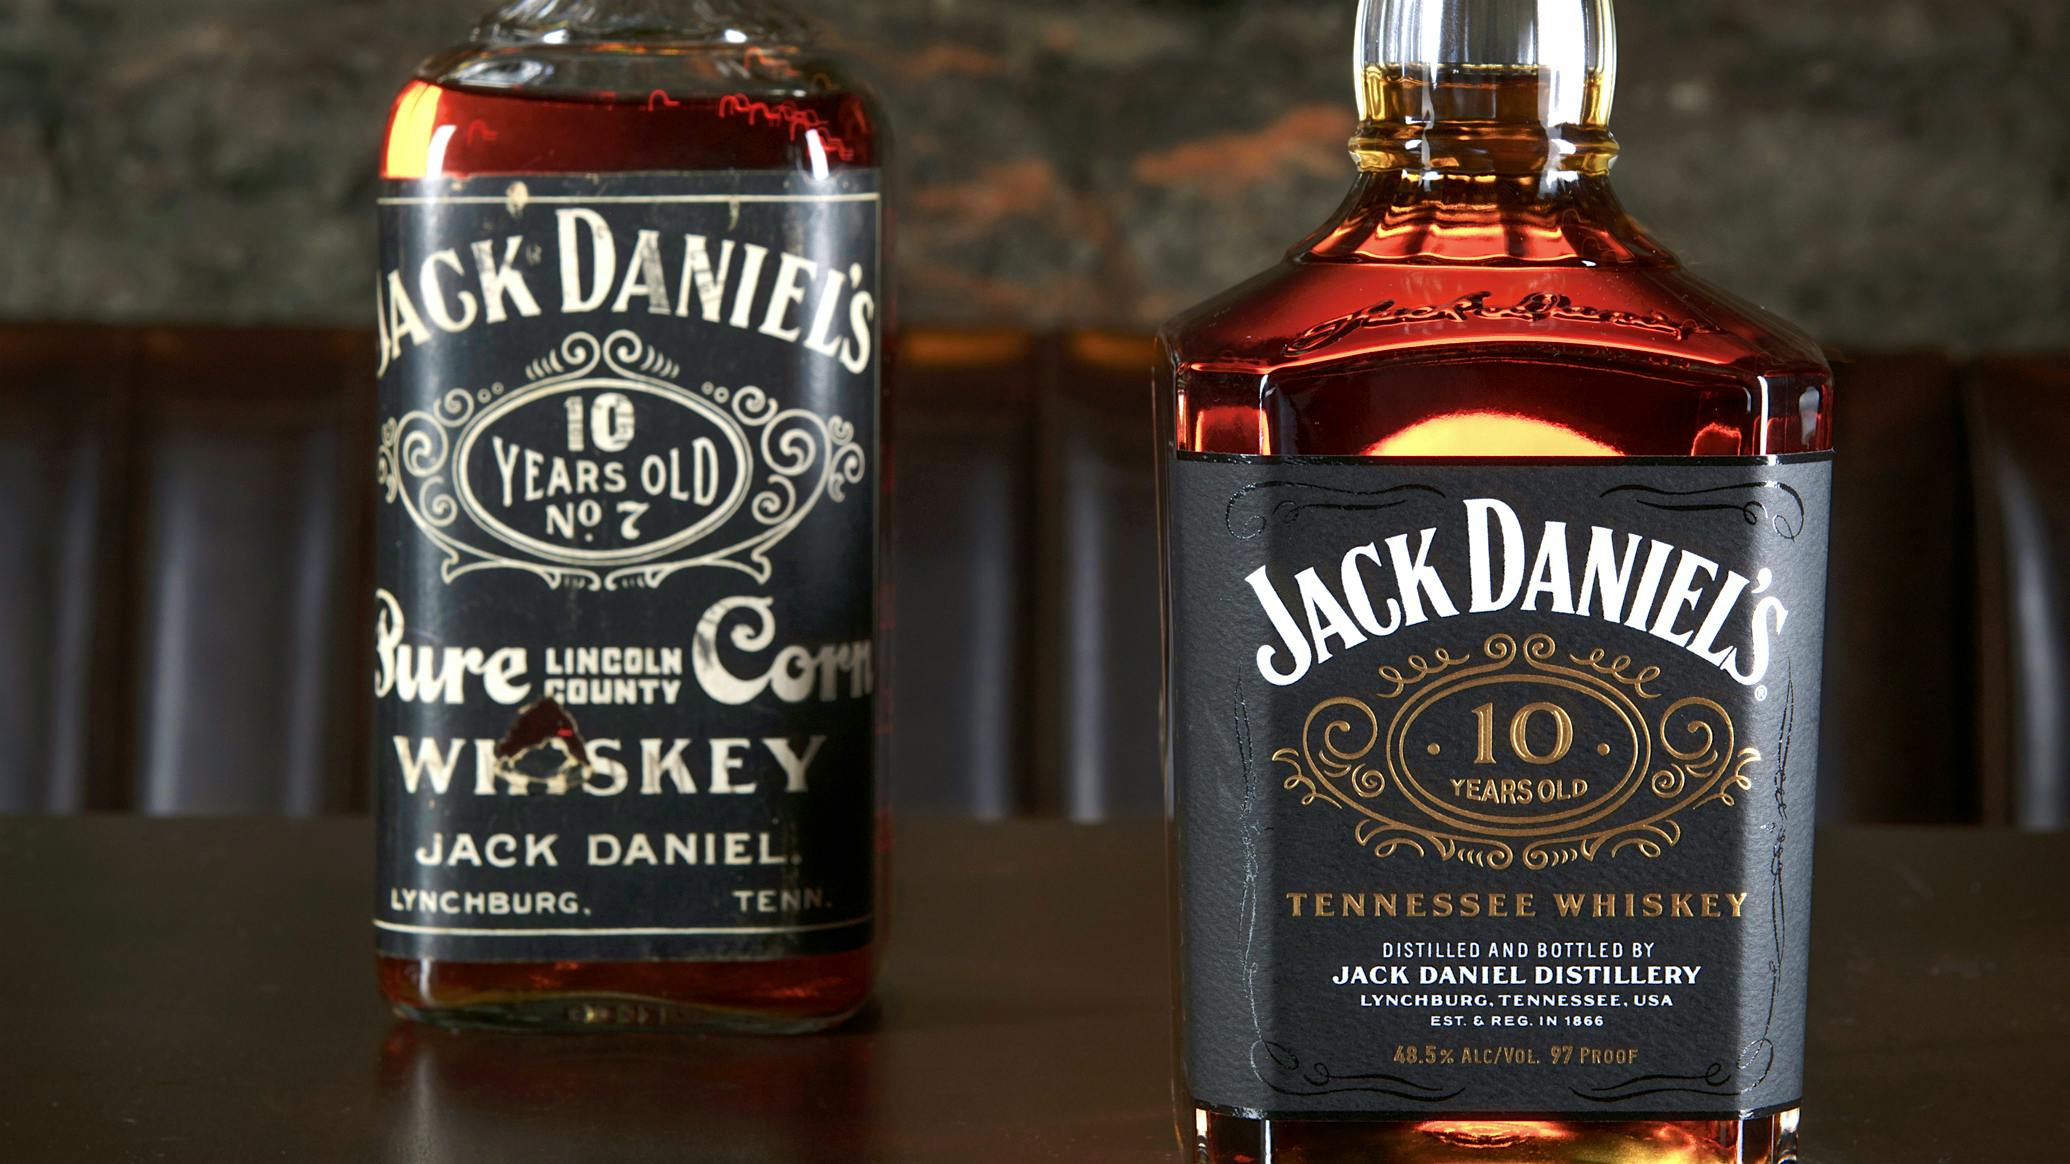 After 100 Years, Jack Daniel's Shows Its Age